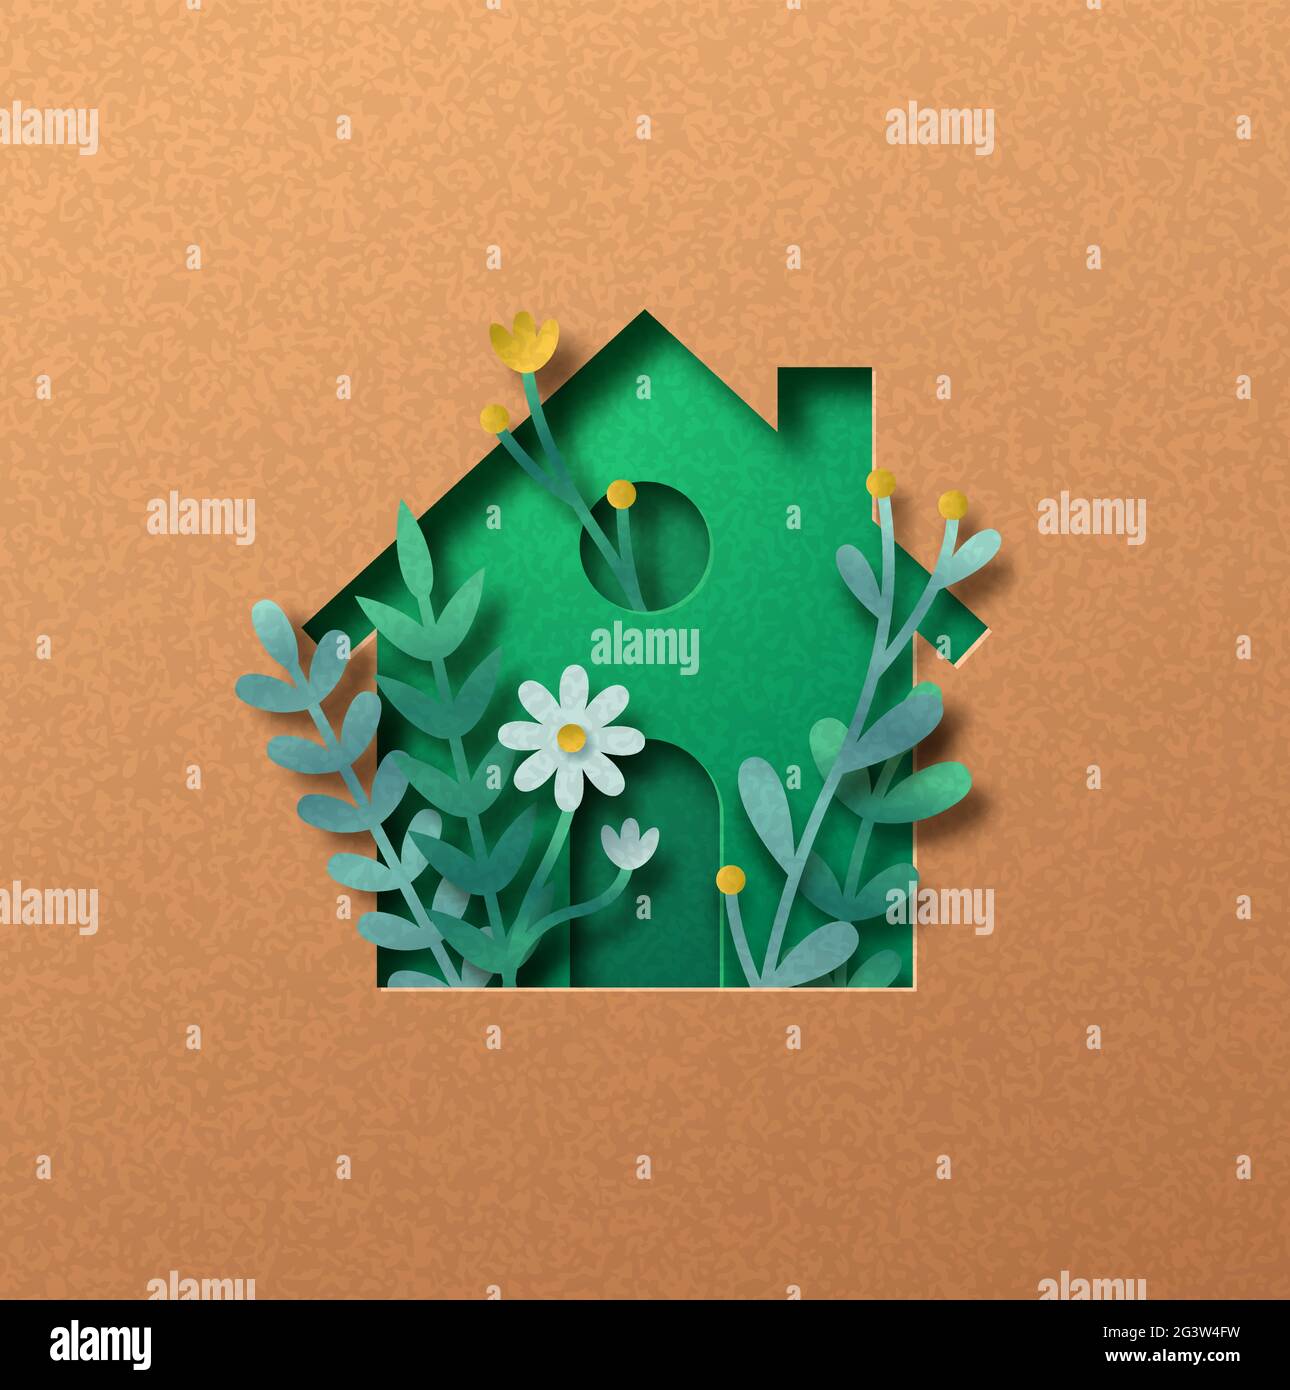 Eco house papercut illustration concept with green leaf and flower garden inside. 3D clean energy home cutout craft in recycled paper background. Sust Stock Vector